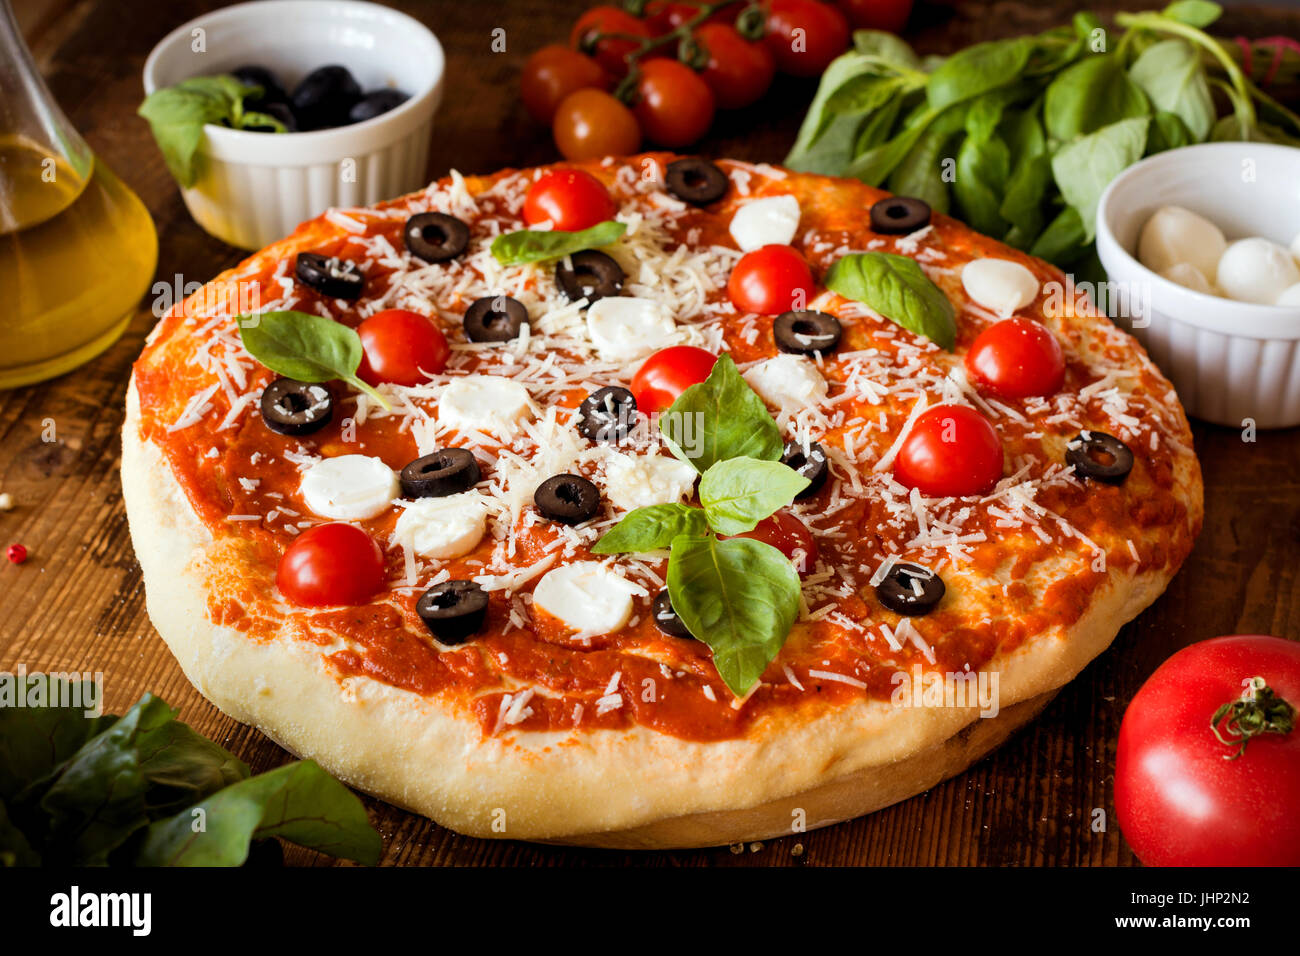 Homemade italian pizza on wooden table. Closeup view Stock Photo